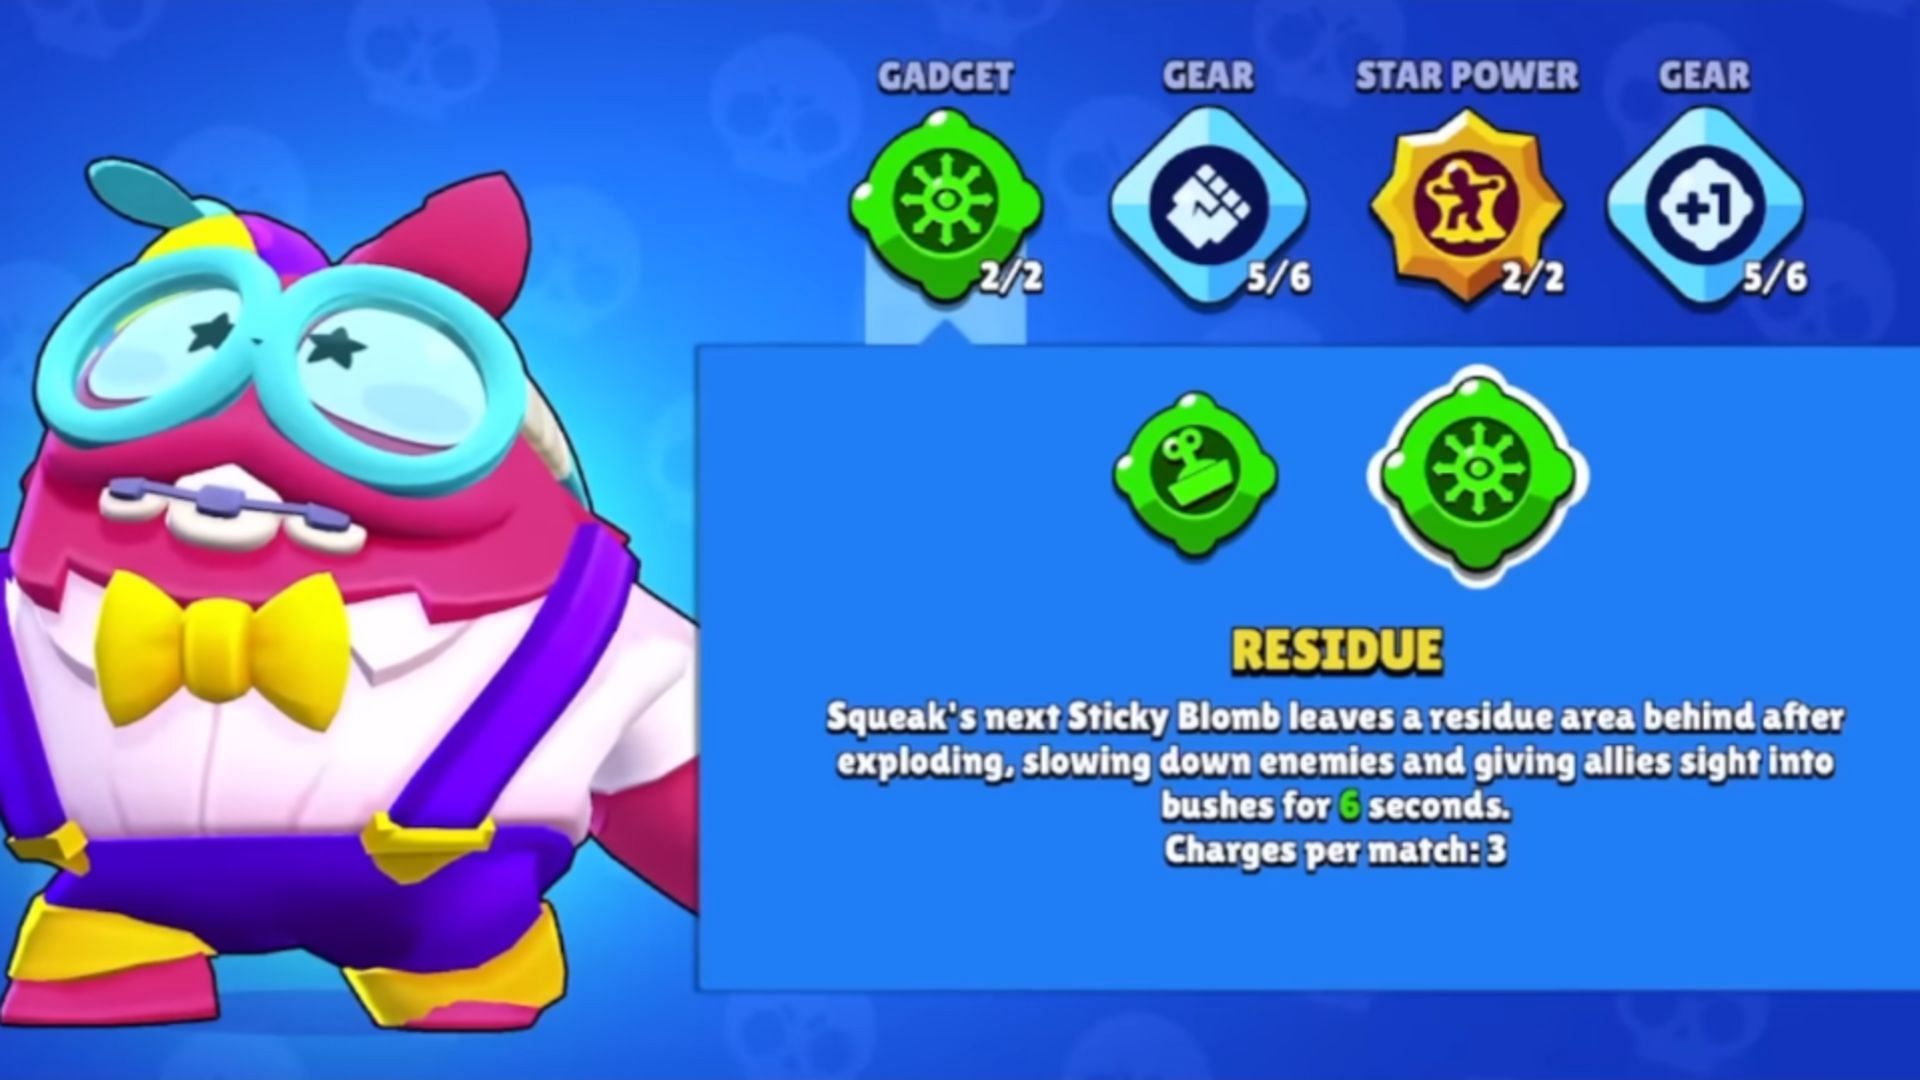 Residue Gadget (Image via Supercell)